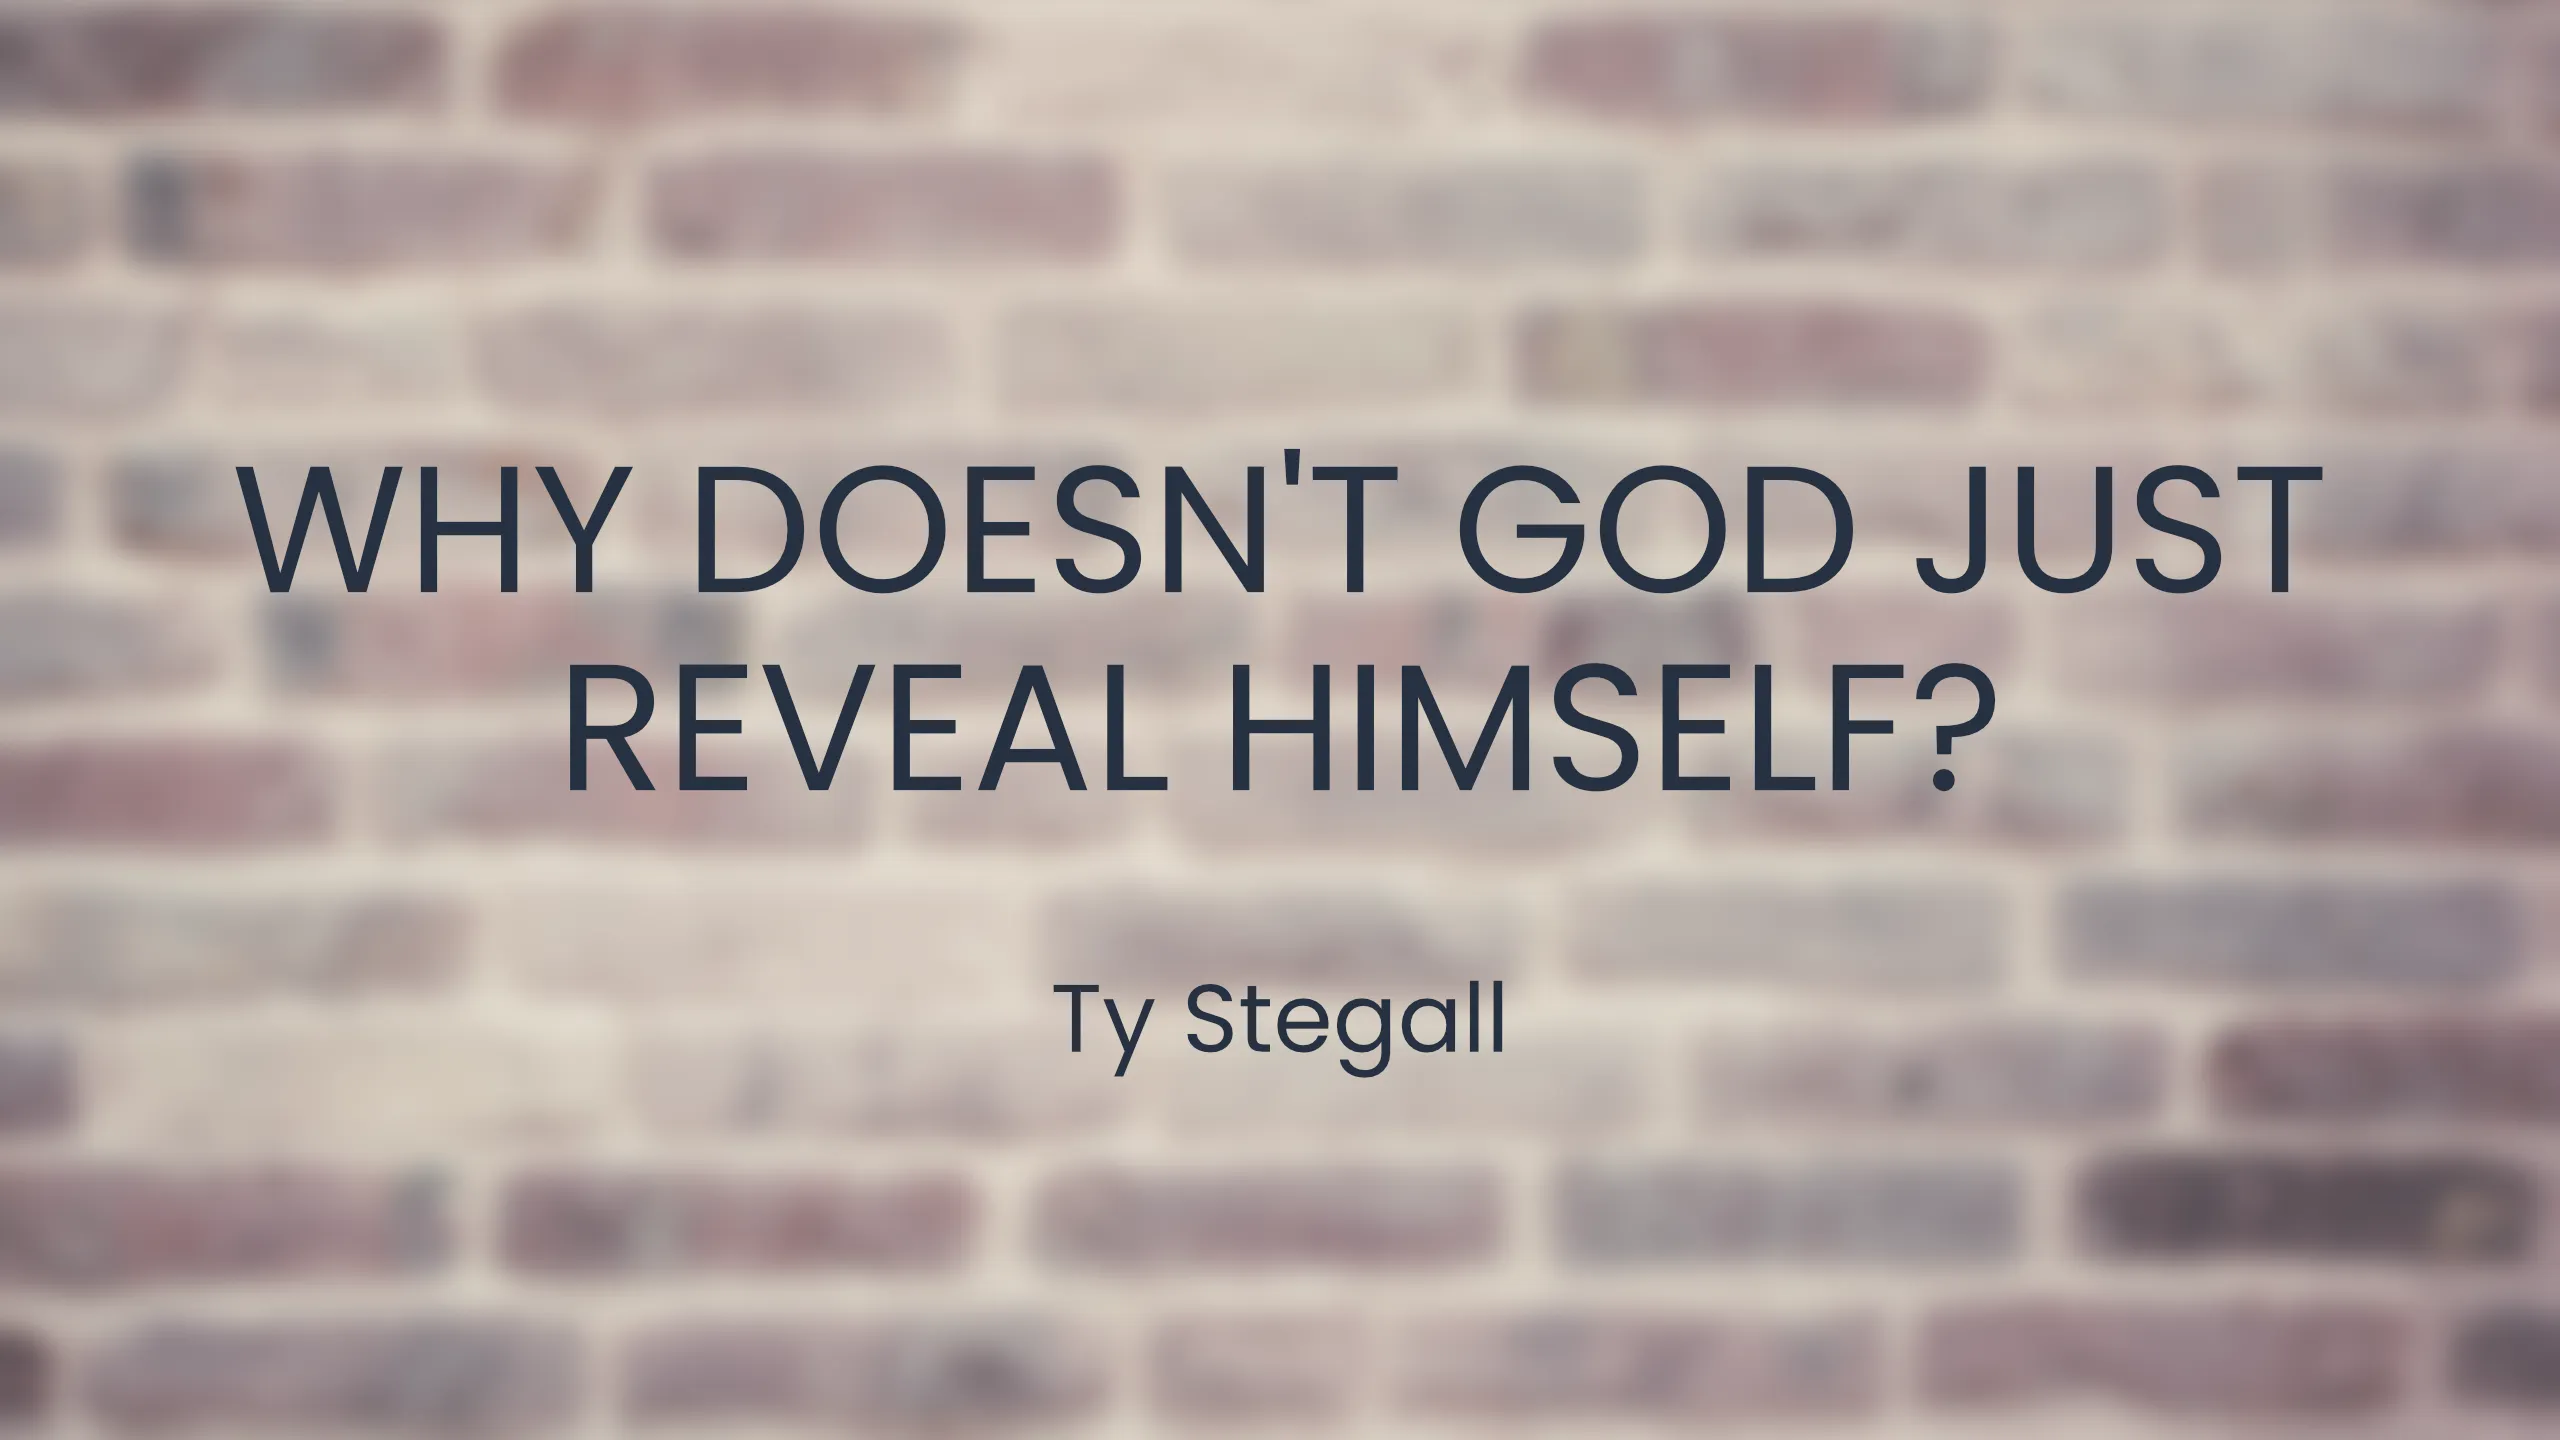 Why Doesn't God Just Reveal Himself?